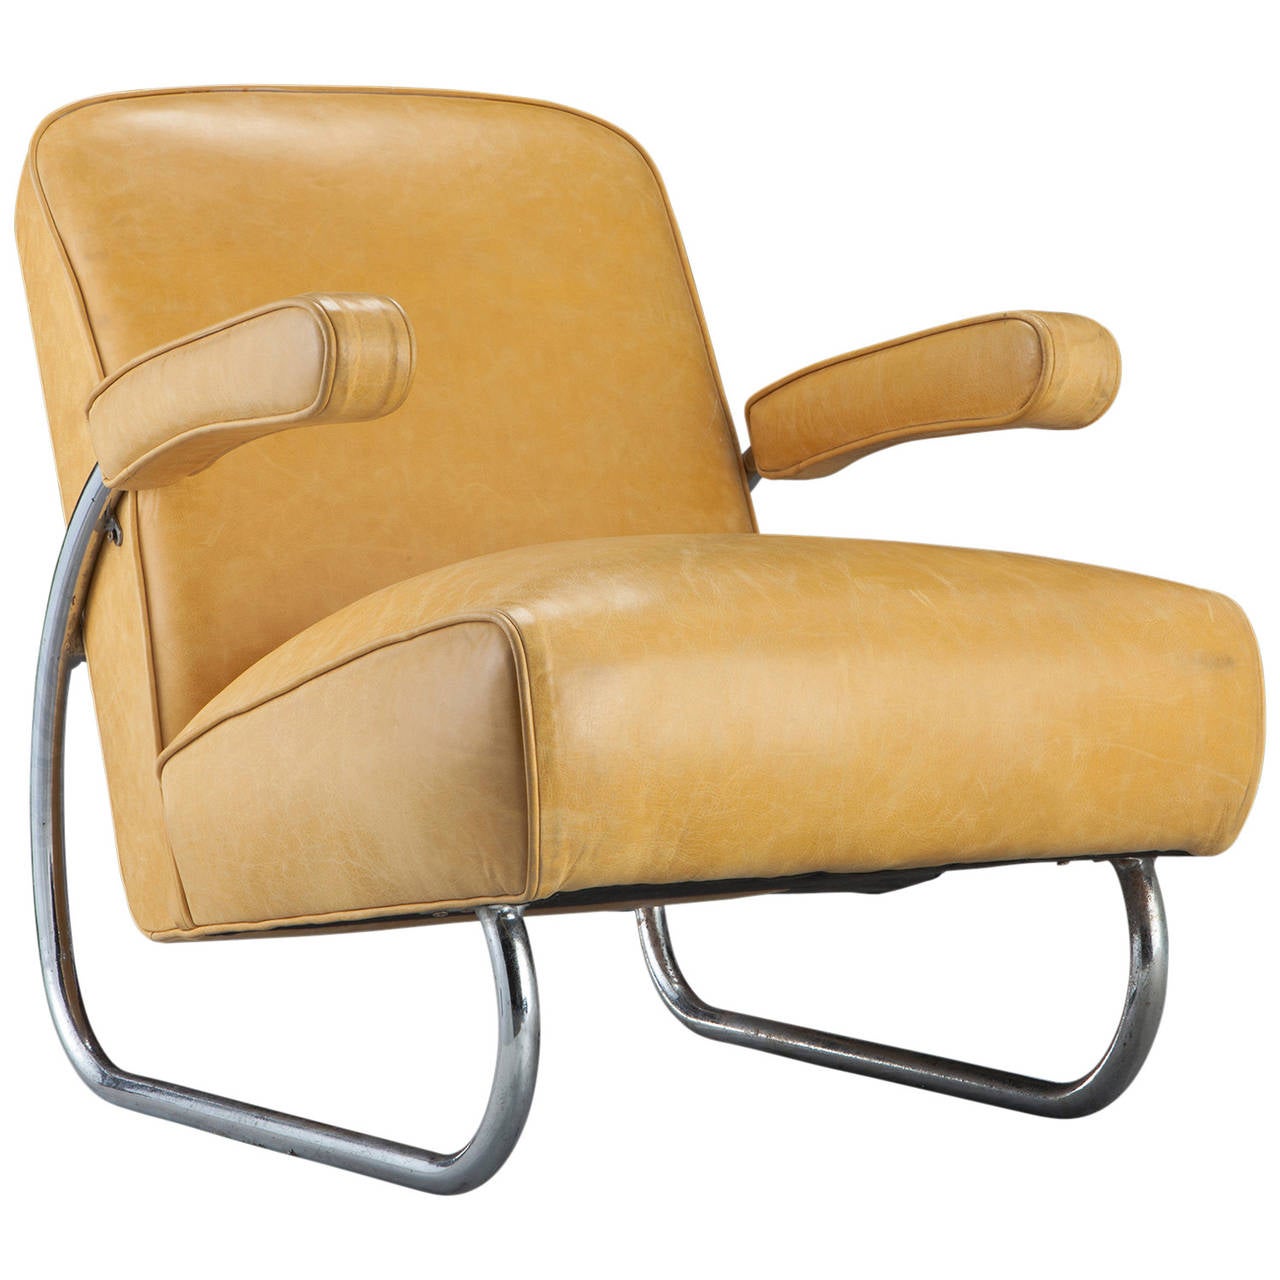 Yellow Leather/Chrome Lounge Chair at 1stdibs